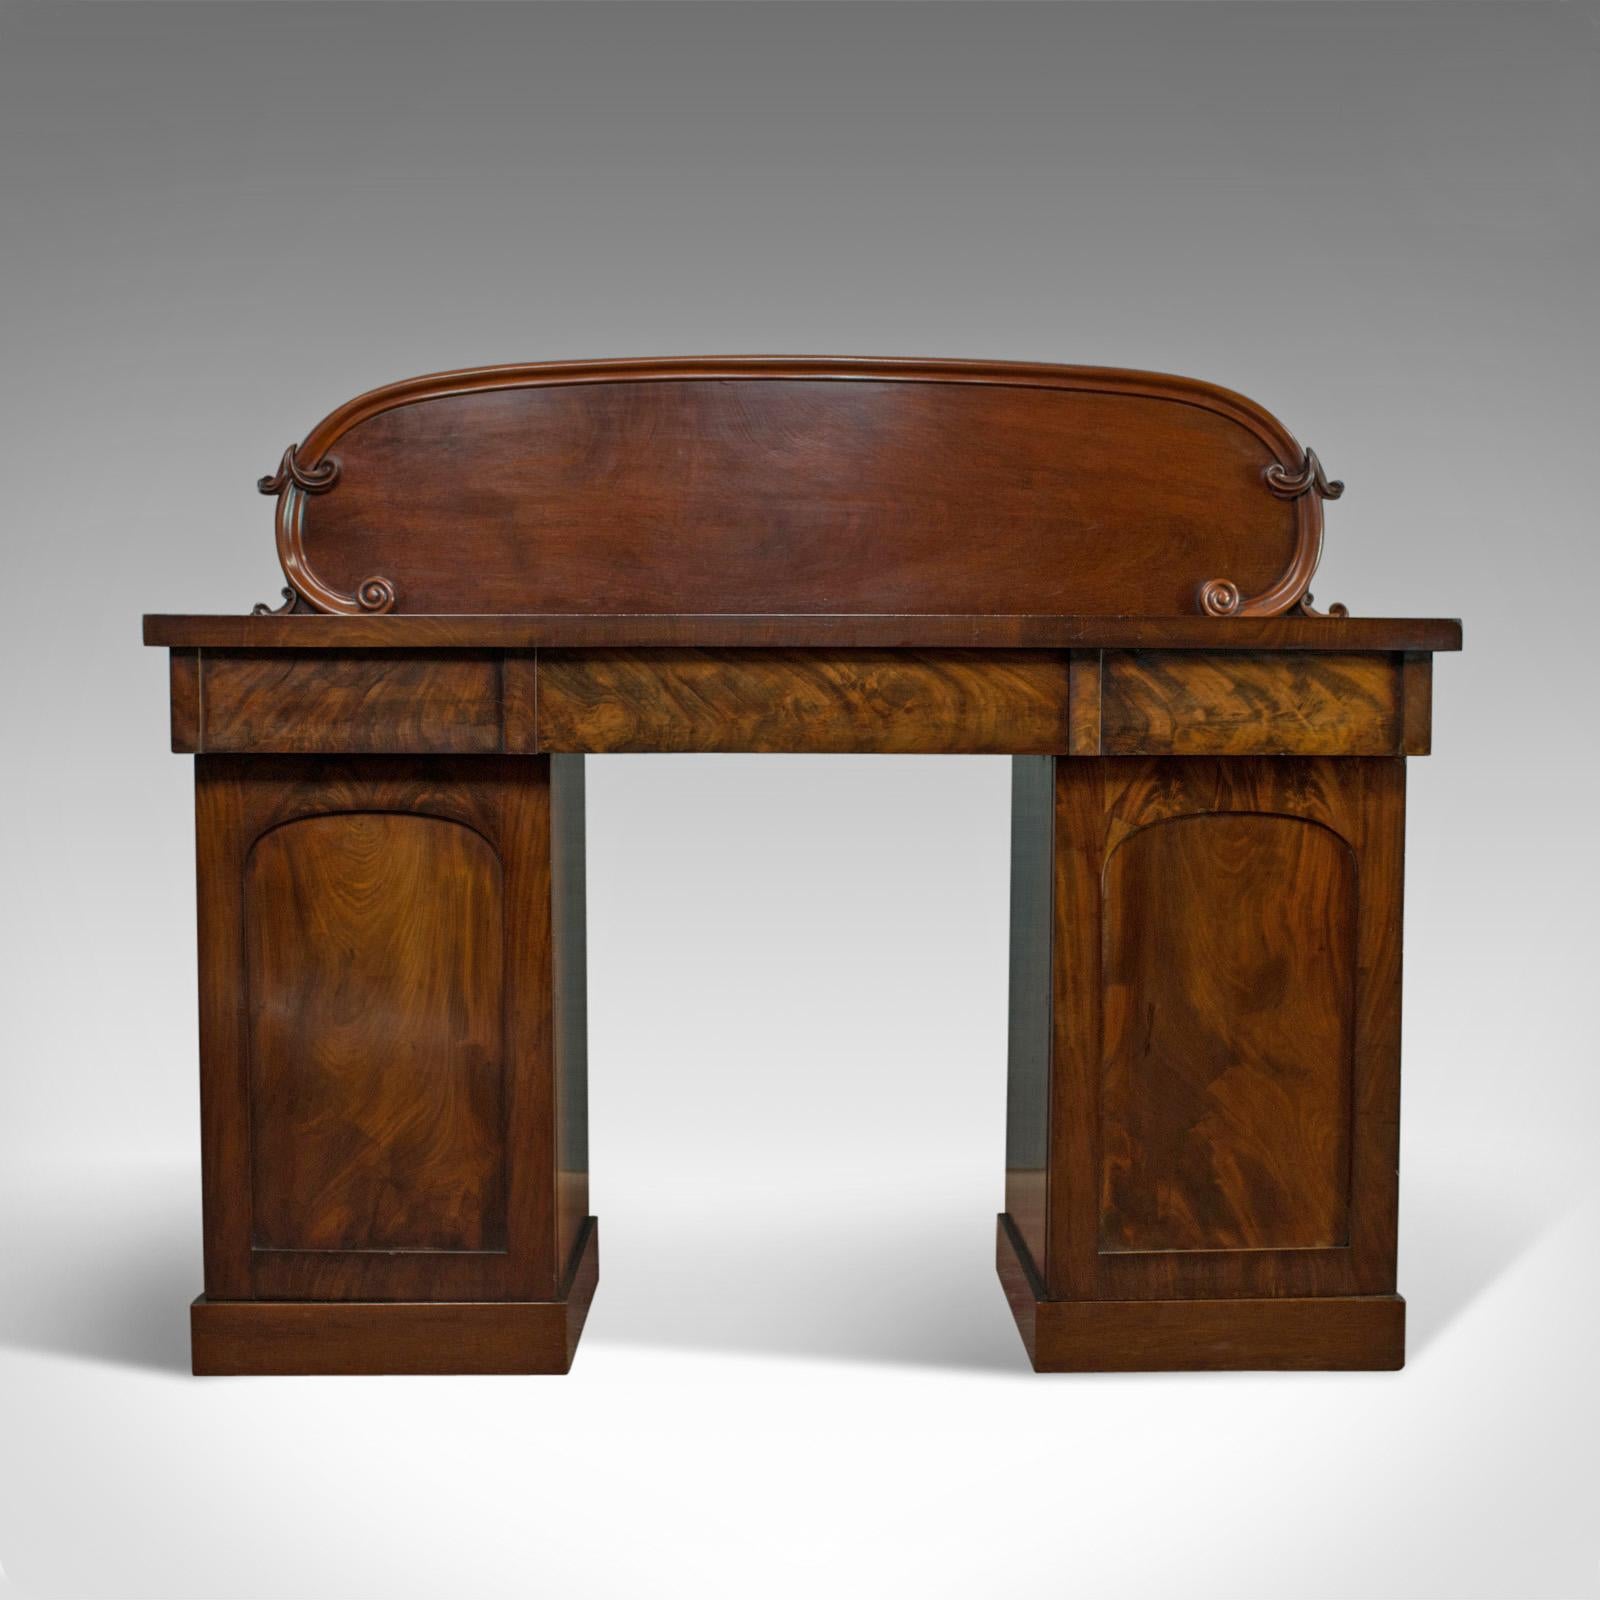 This is an antique pedestal sideboard. An English, early Victorian, mahogany dresser dating to the mid-19th century, circa 1850.

Select mahogany resplendent with flame figuring and fine grain interest
Good consistent color throughout and